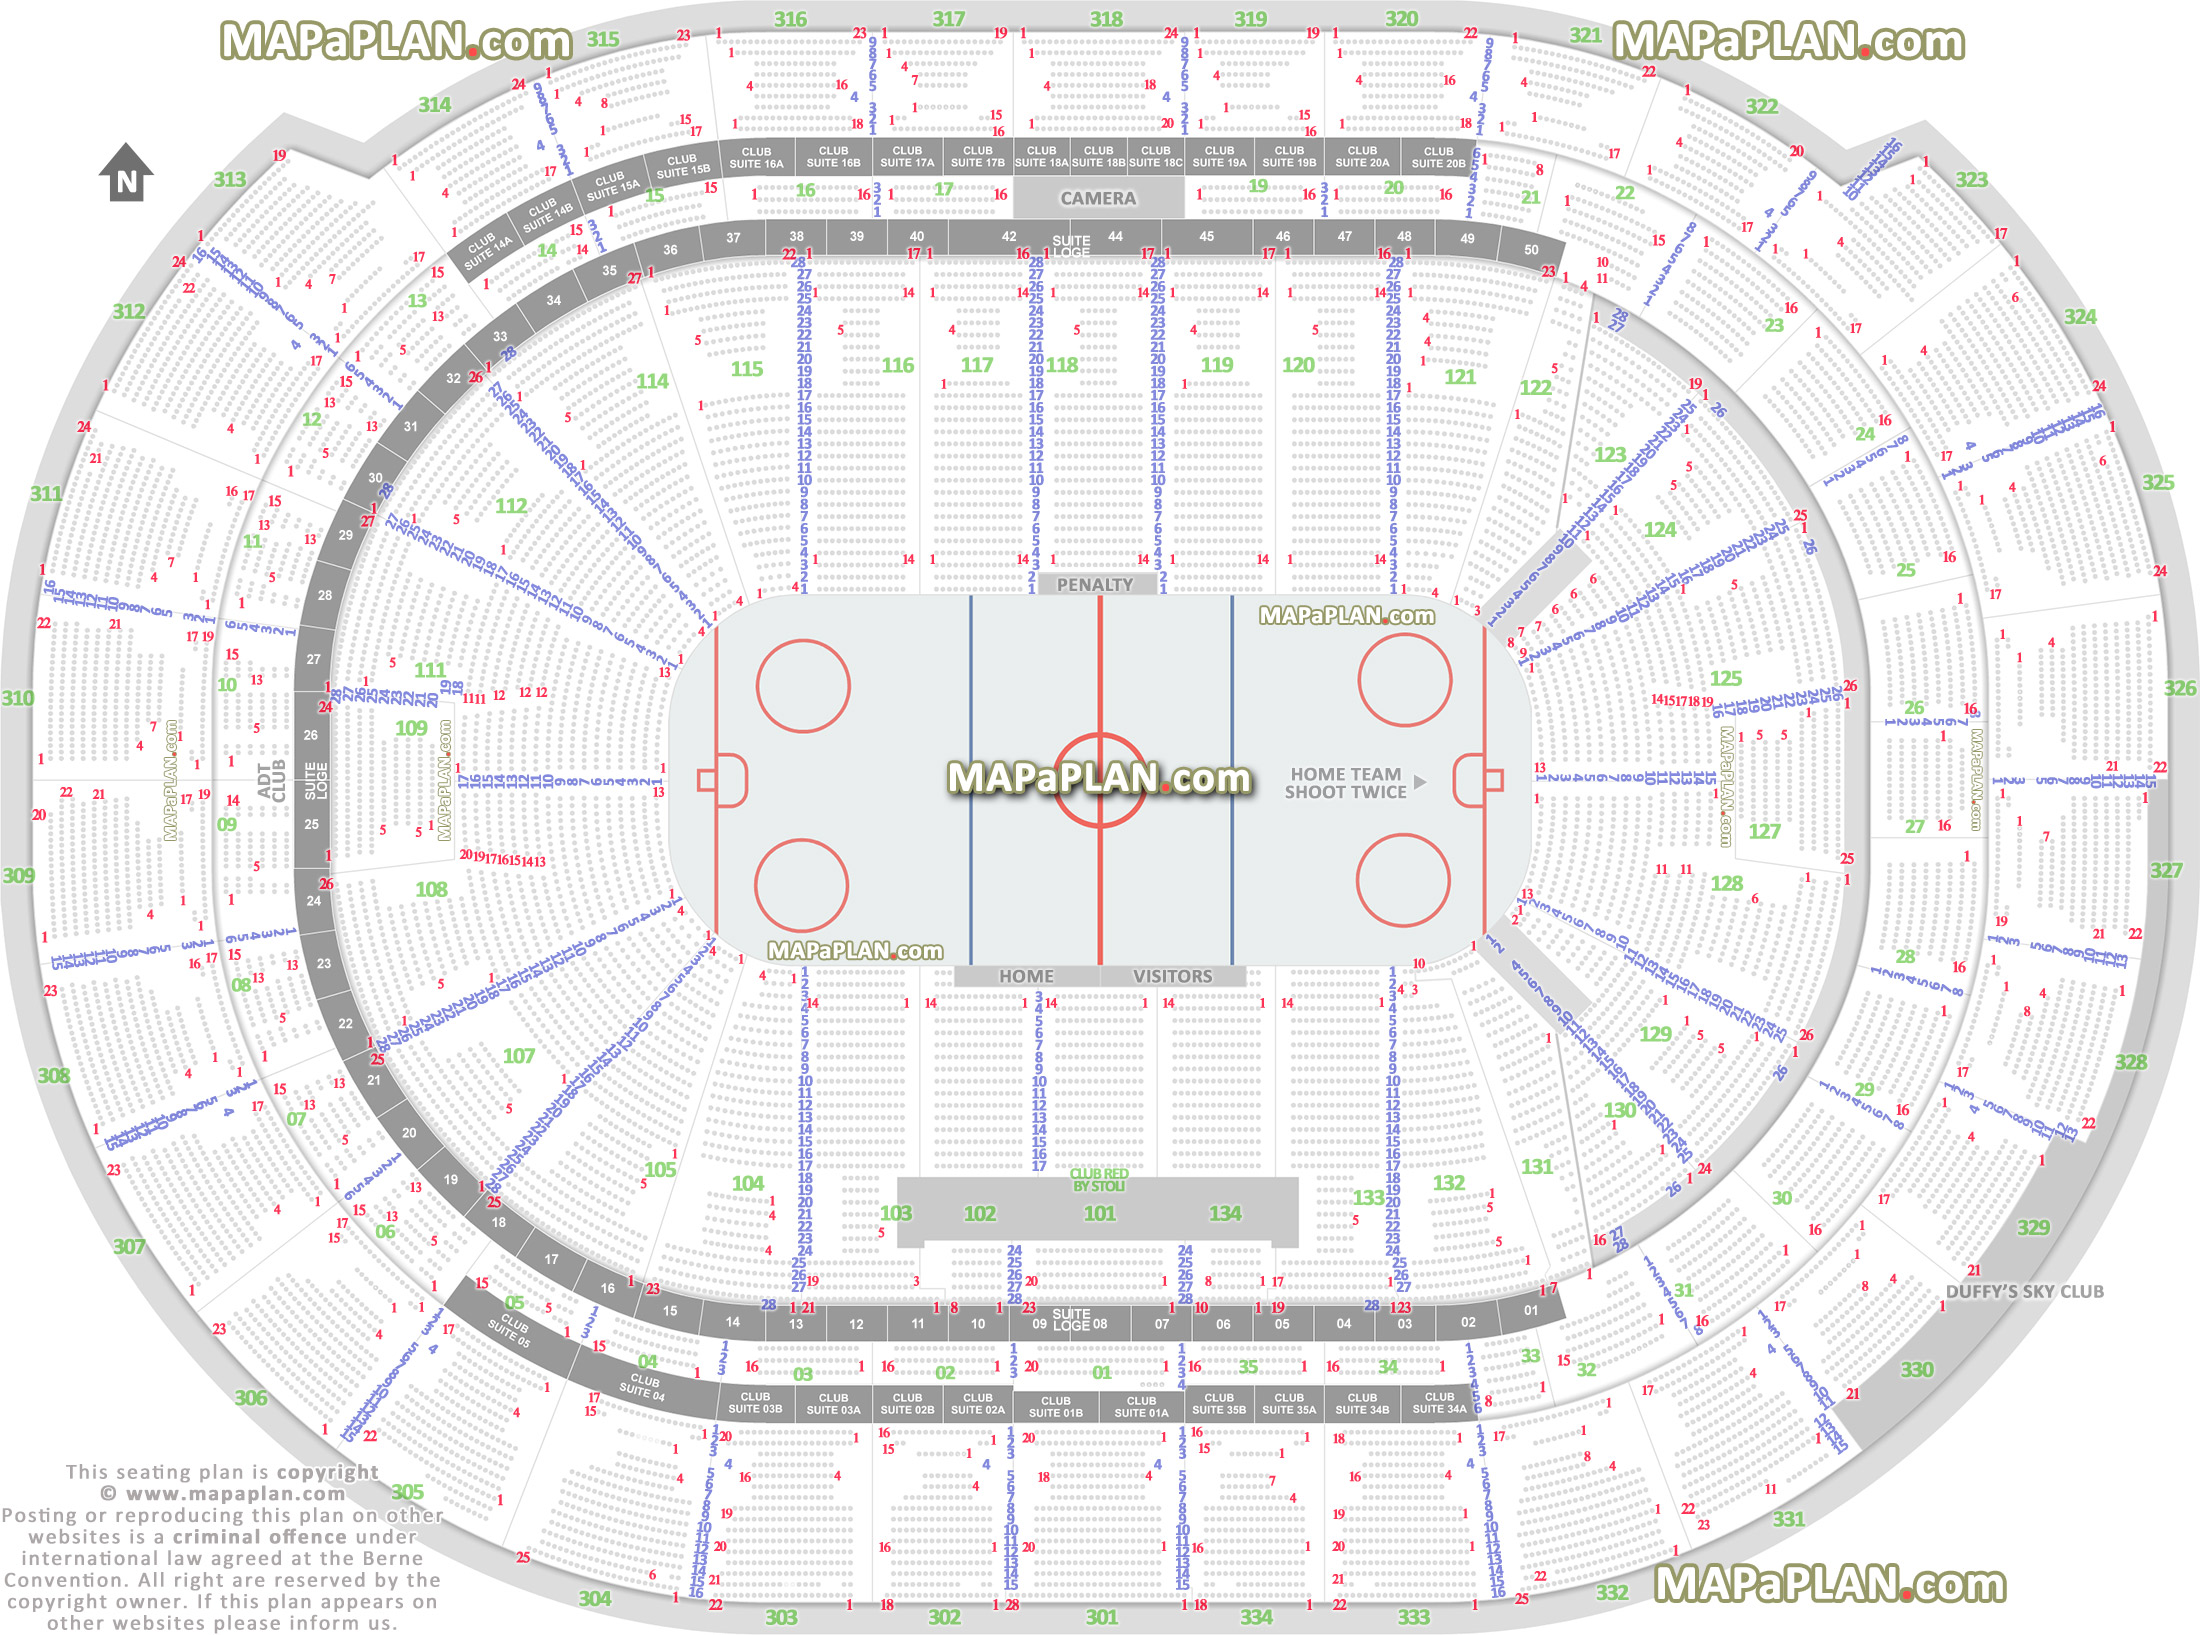 florida panthers new nhl stadium ice hockey rink individual find my seat locator penalty box adt club luxury suites duffys sky area Sunrise FLA Live Arena seating chart